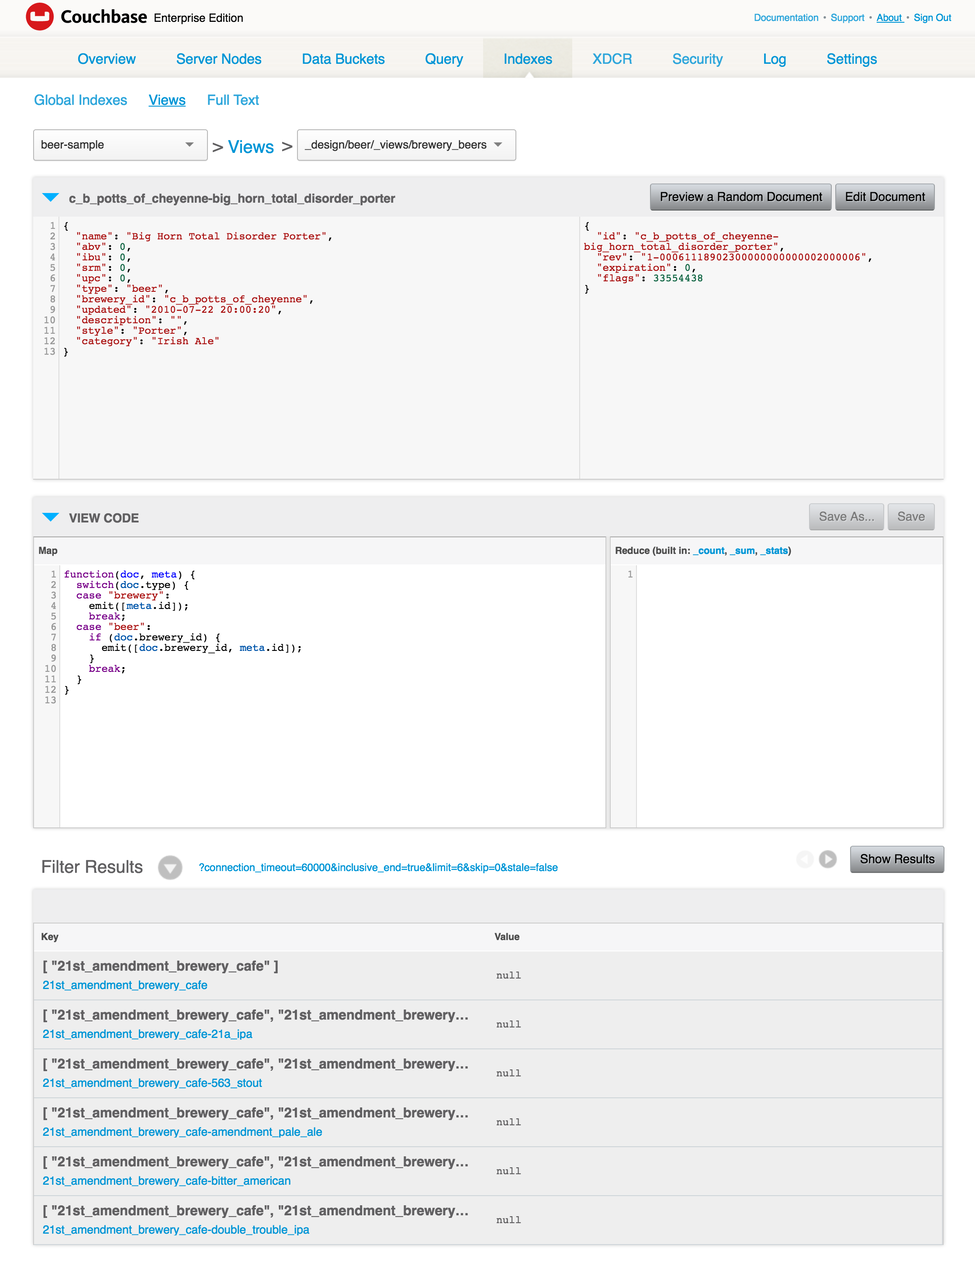 Couchbase Server View Sample